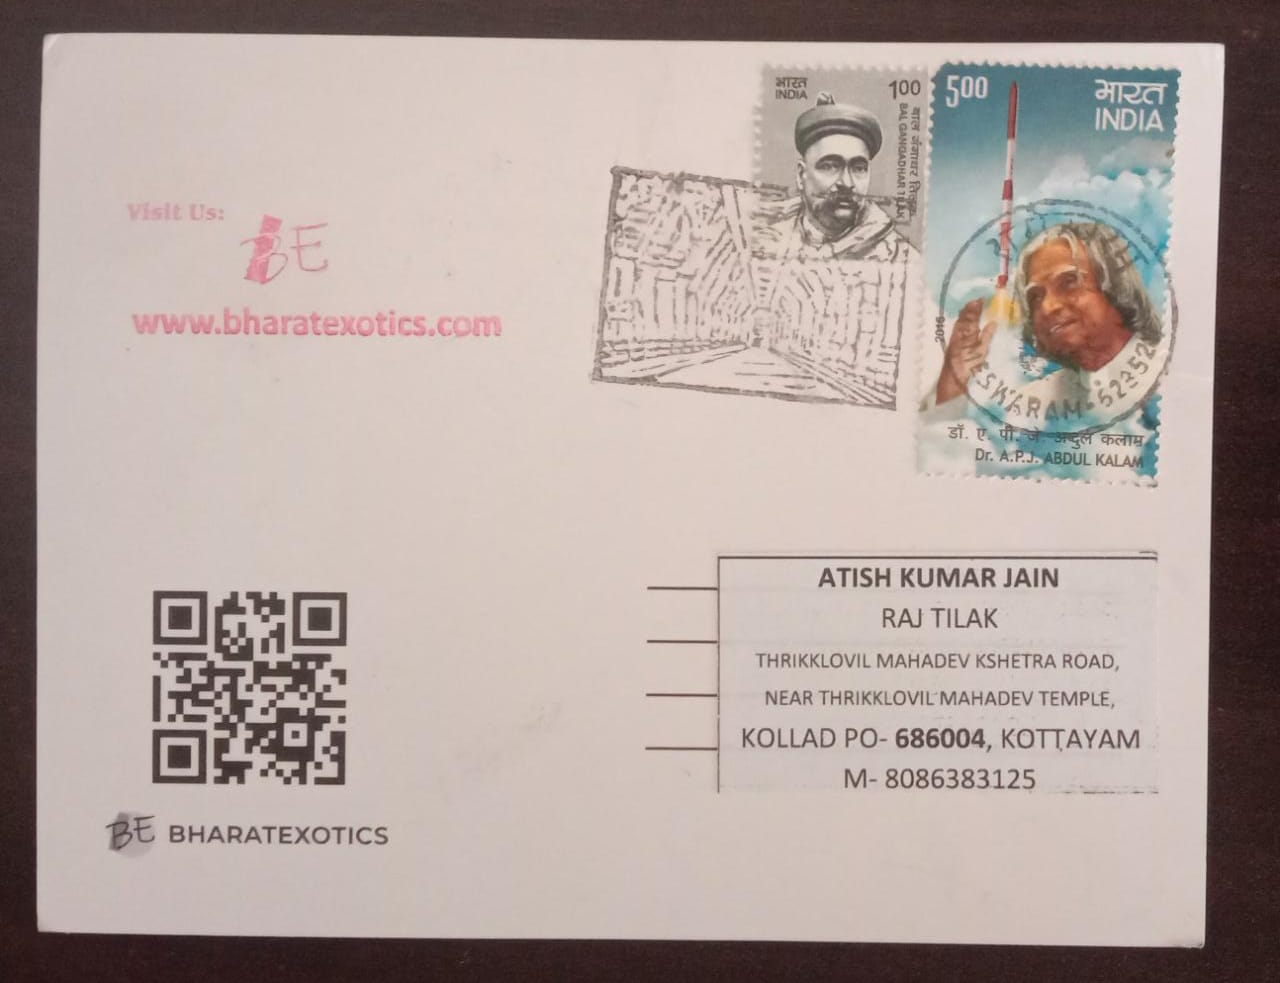 Postally used philatelic permanent pictorial cancellation place covers from Rameshwaram